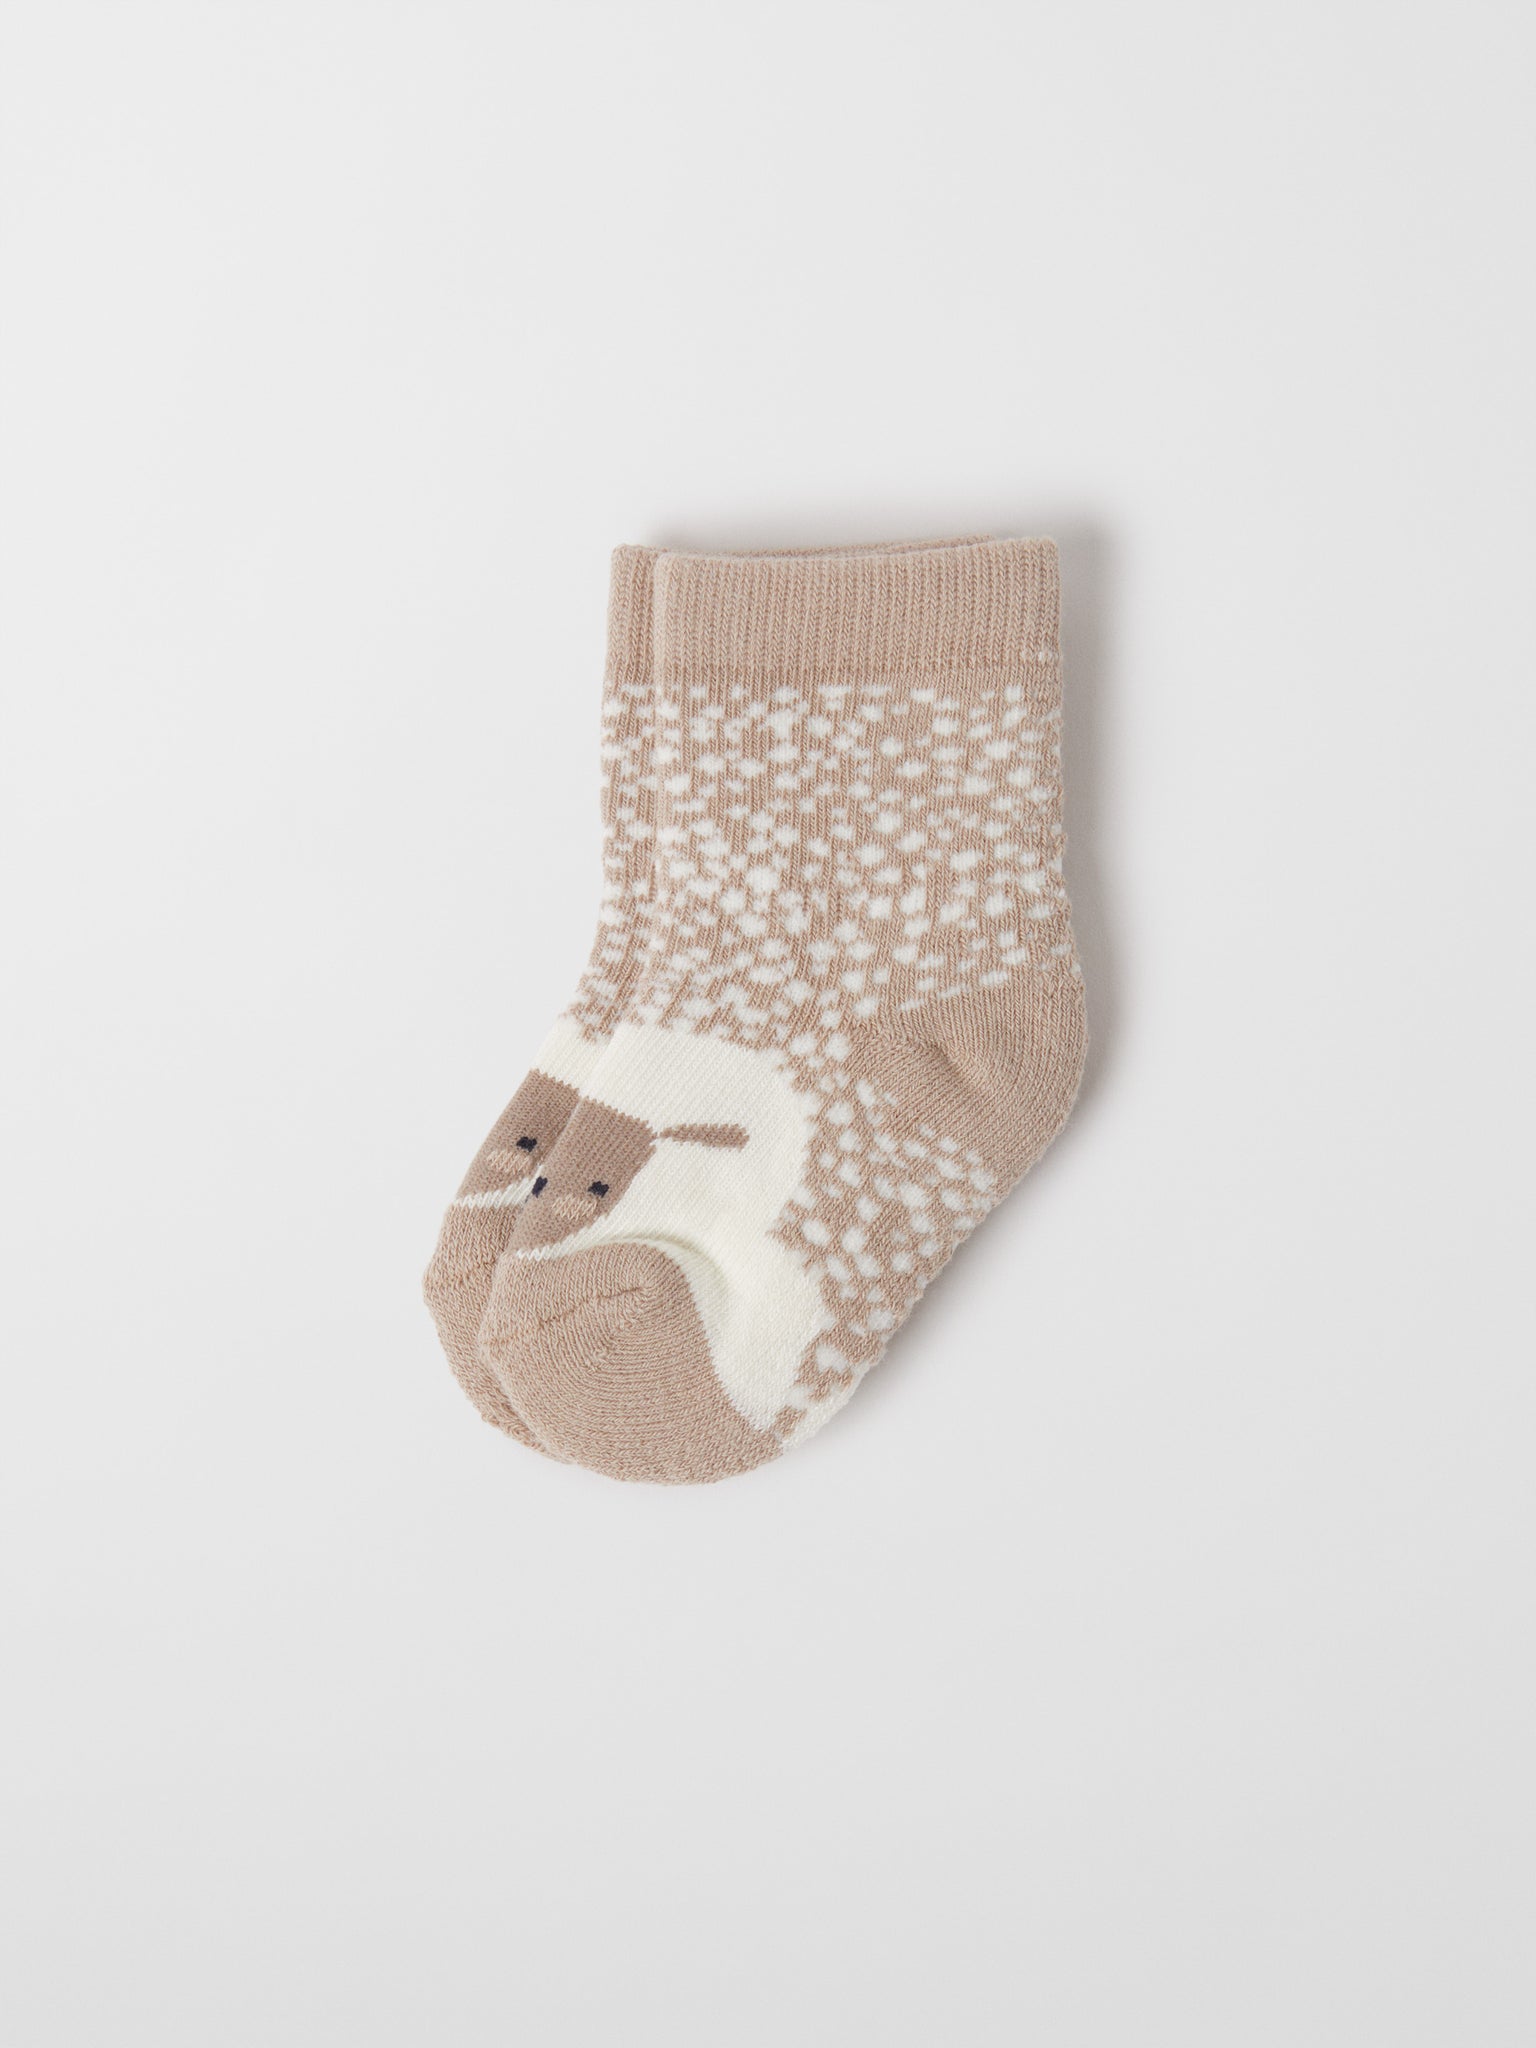 Organic Cotton Baby Socks Multipack from the Polarn O. Pyret baby collection. Ethically produced baby clothing.